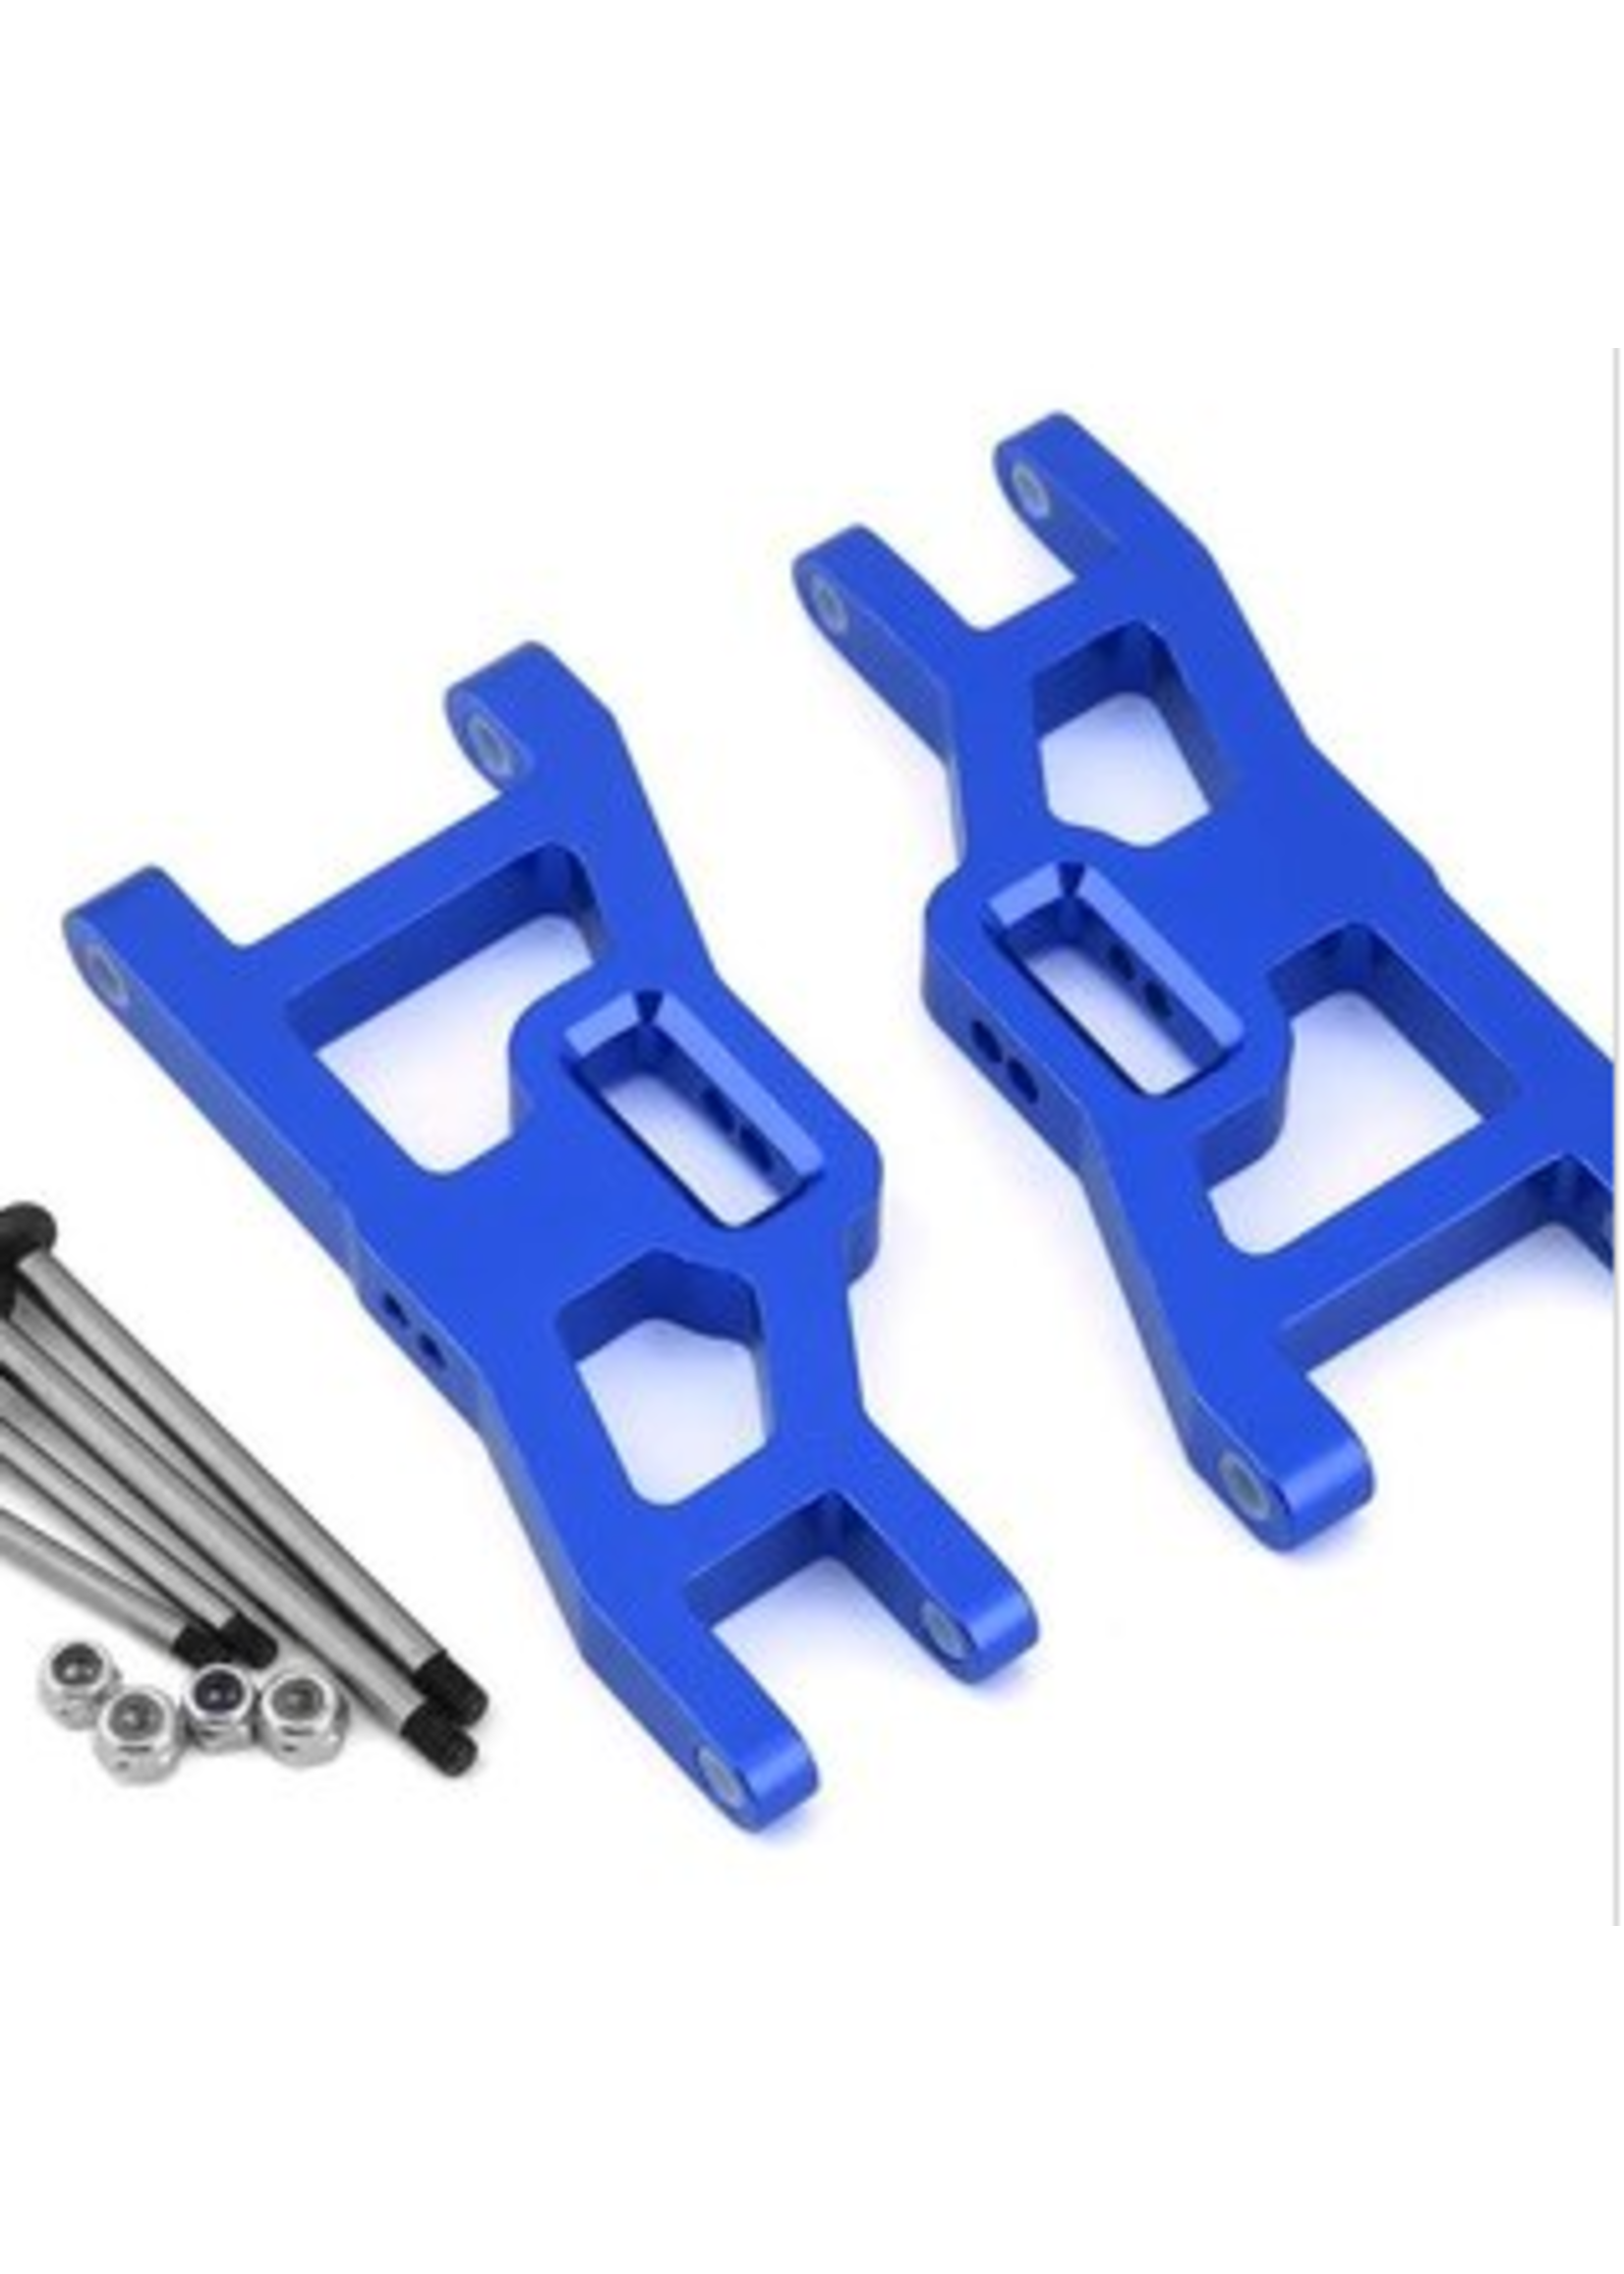 ST Racing Concepts SPTST3631XB ST Racing Concepts Heavy Duty Front Suspension Arms Kit w/ Lock-Nut Hinge-Pins, for Traxxas Rustler/Stampede (Blue)